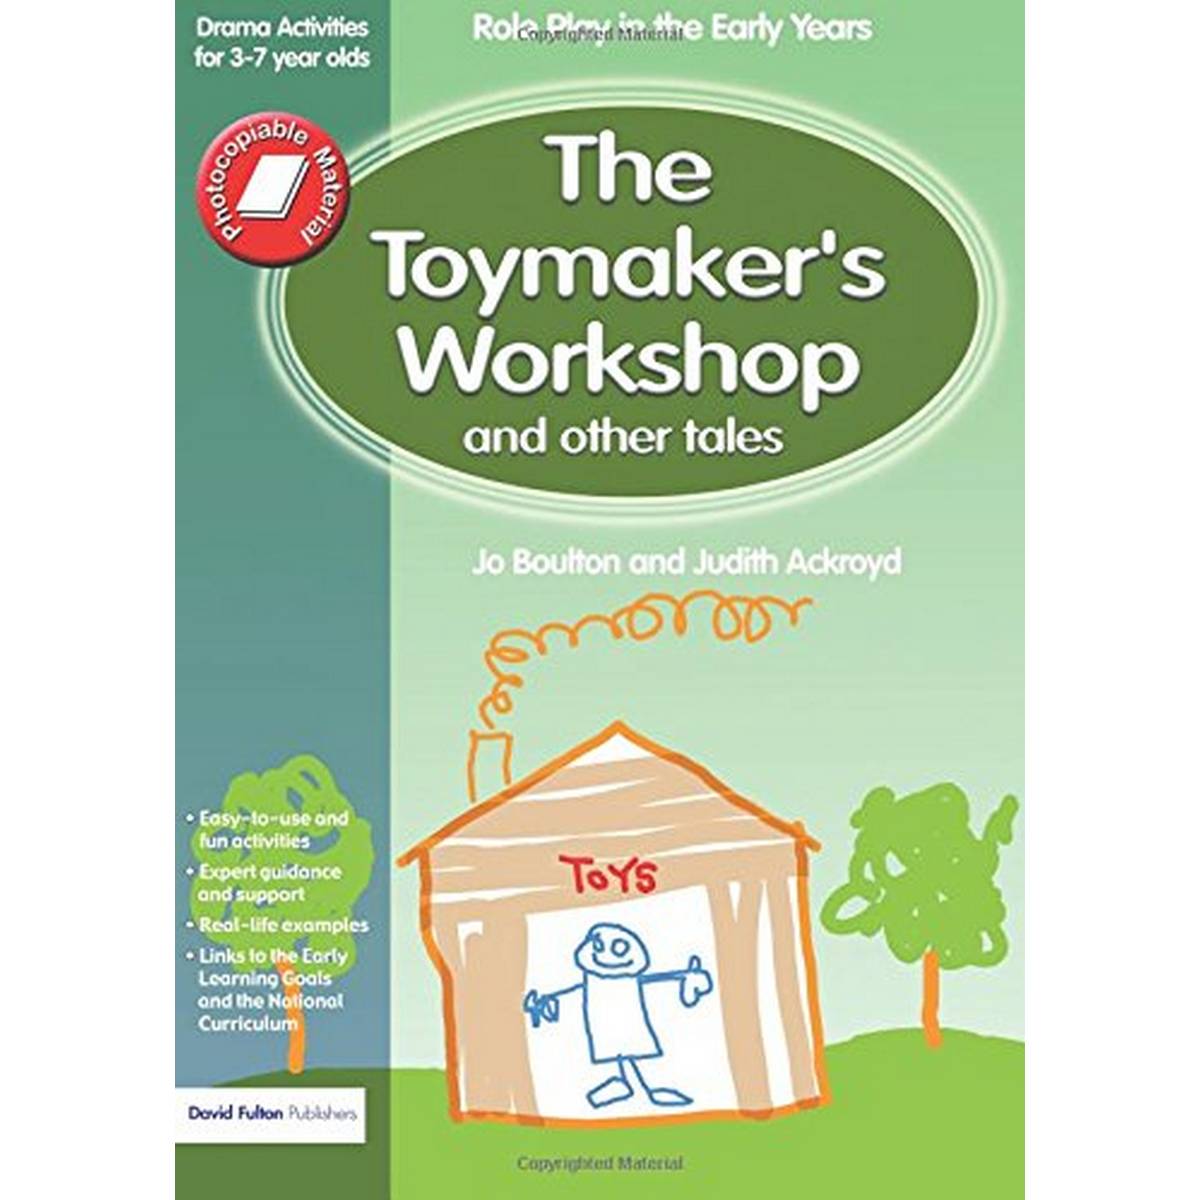 The Toymaker's Workshop and Other Tales (Role-play in the Early Years)